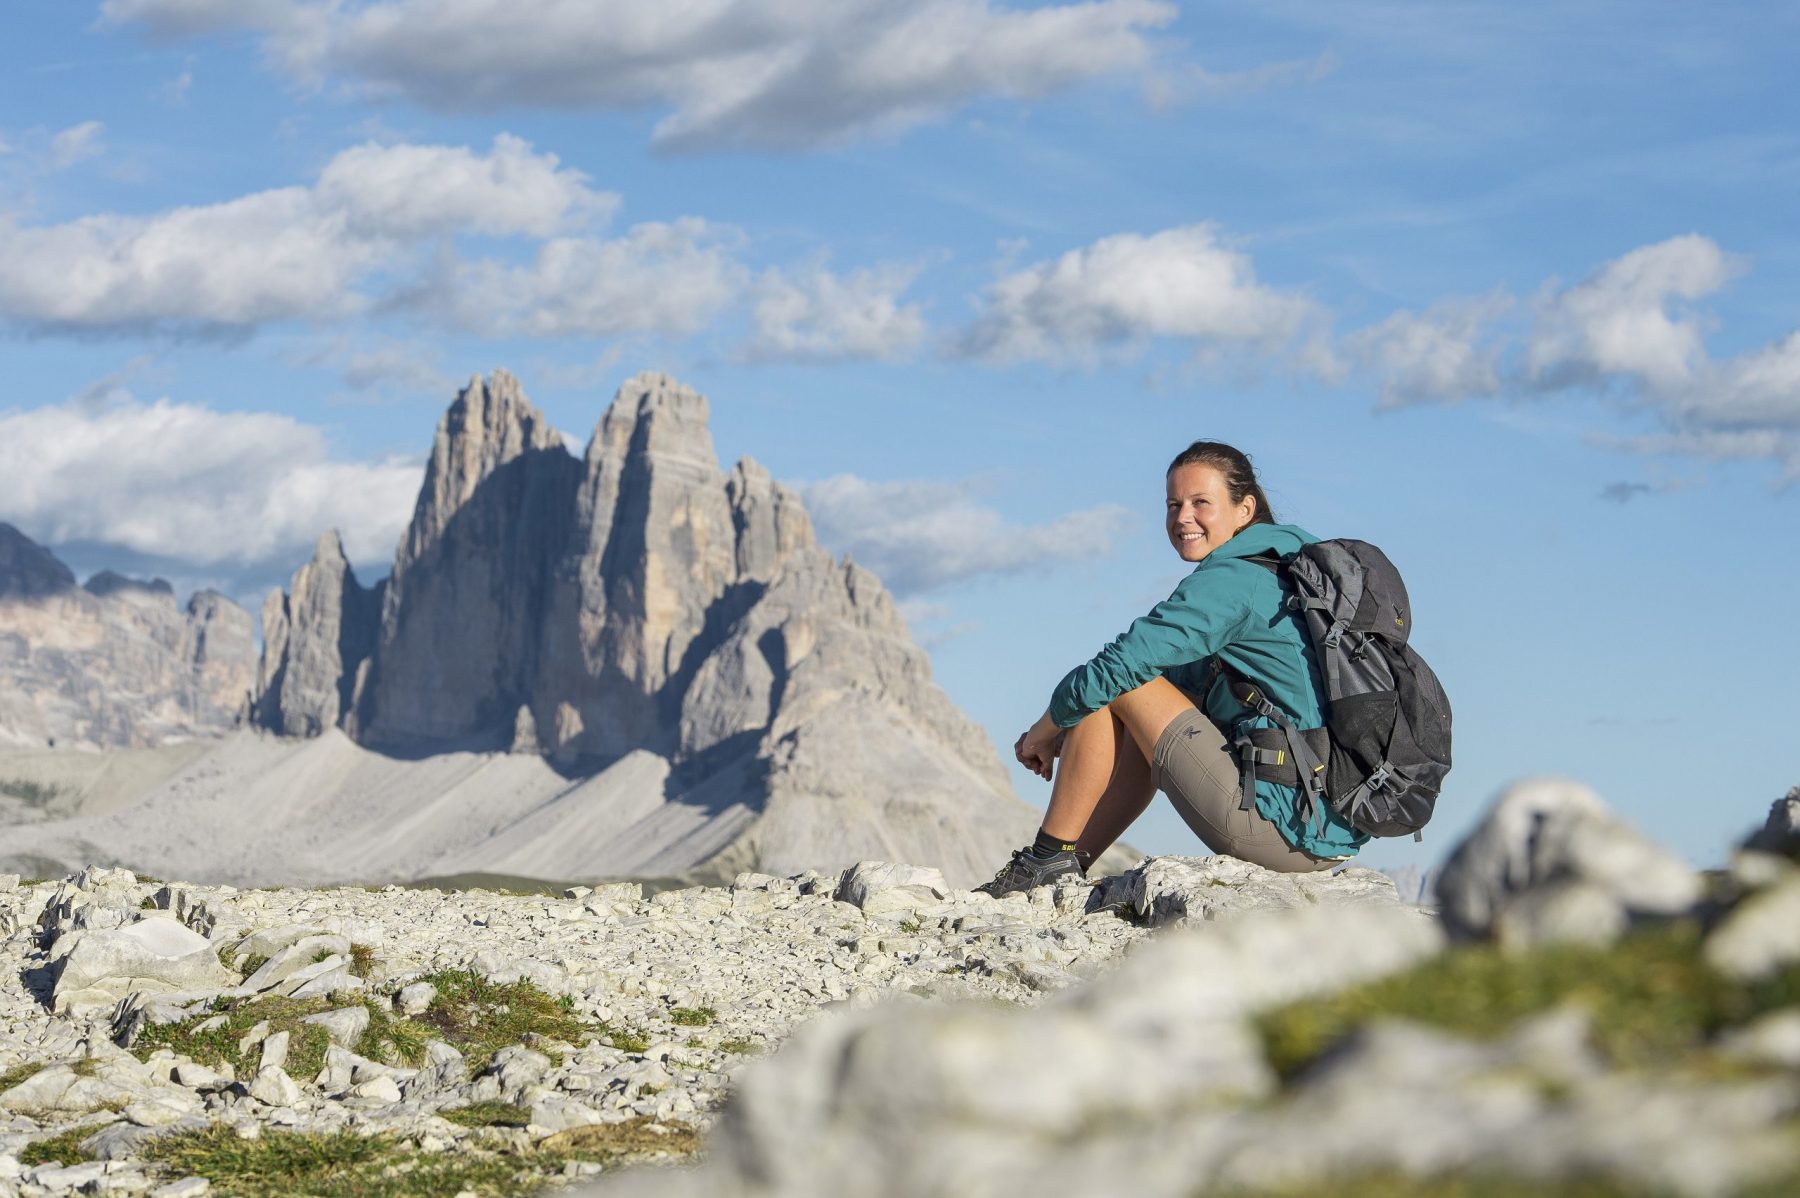 Copyright: IDM South Tyrol / Thomas Grüner. A woman having a break with a view. From the homecoming cross there is a beautiful view of the famous mountain range of the Three Peaks.